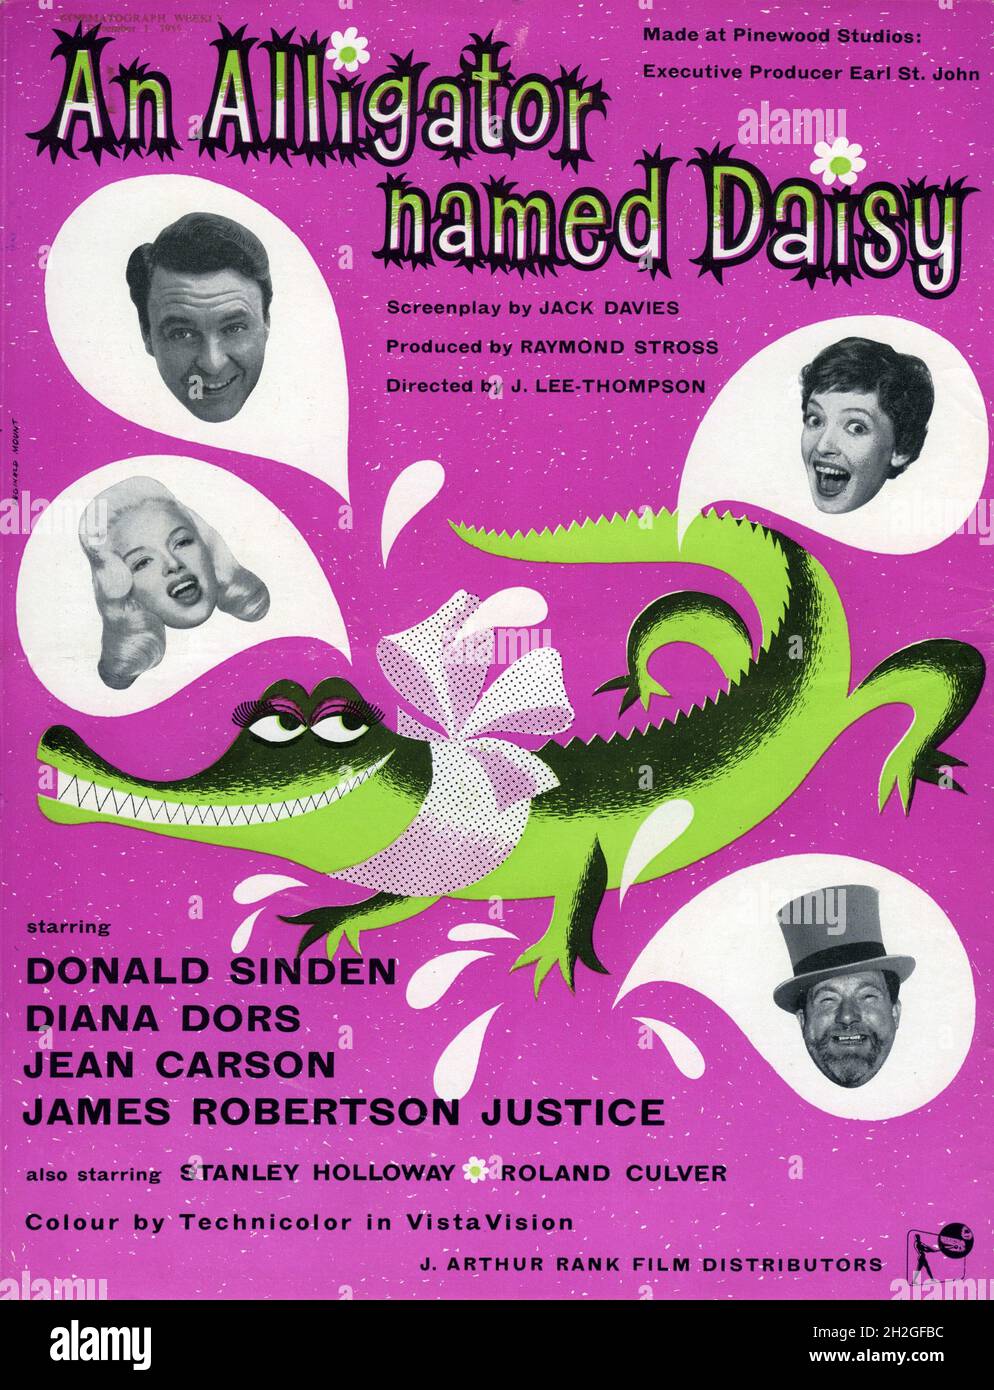 British Trade Ad for DONALD SINDEN DIANA DORS JEAN CARSON and JAMES ROBERTSON JUSTICE in AN ALLIGATOR NAMED DAISY 1955 director J. LEE THOMPSON novel Charles Terrot screenplay Jack Davies Raymond Stross Productions / The Rank Organisation Stock Photo